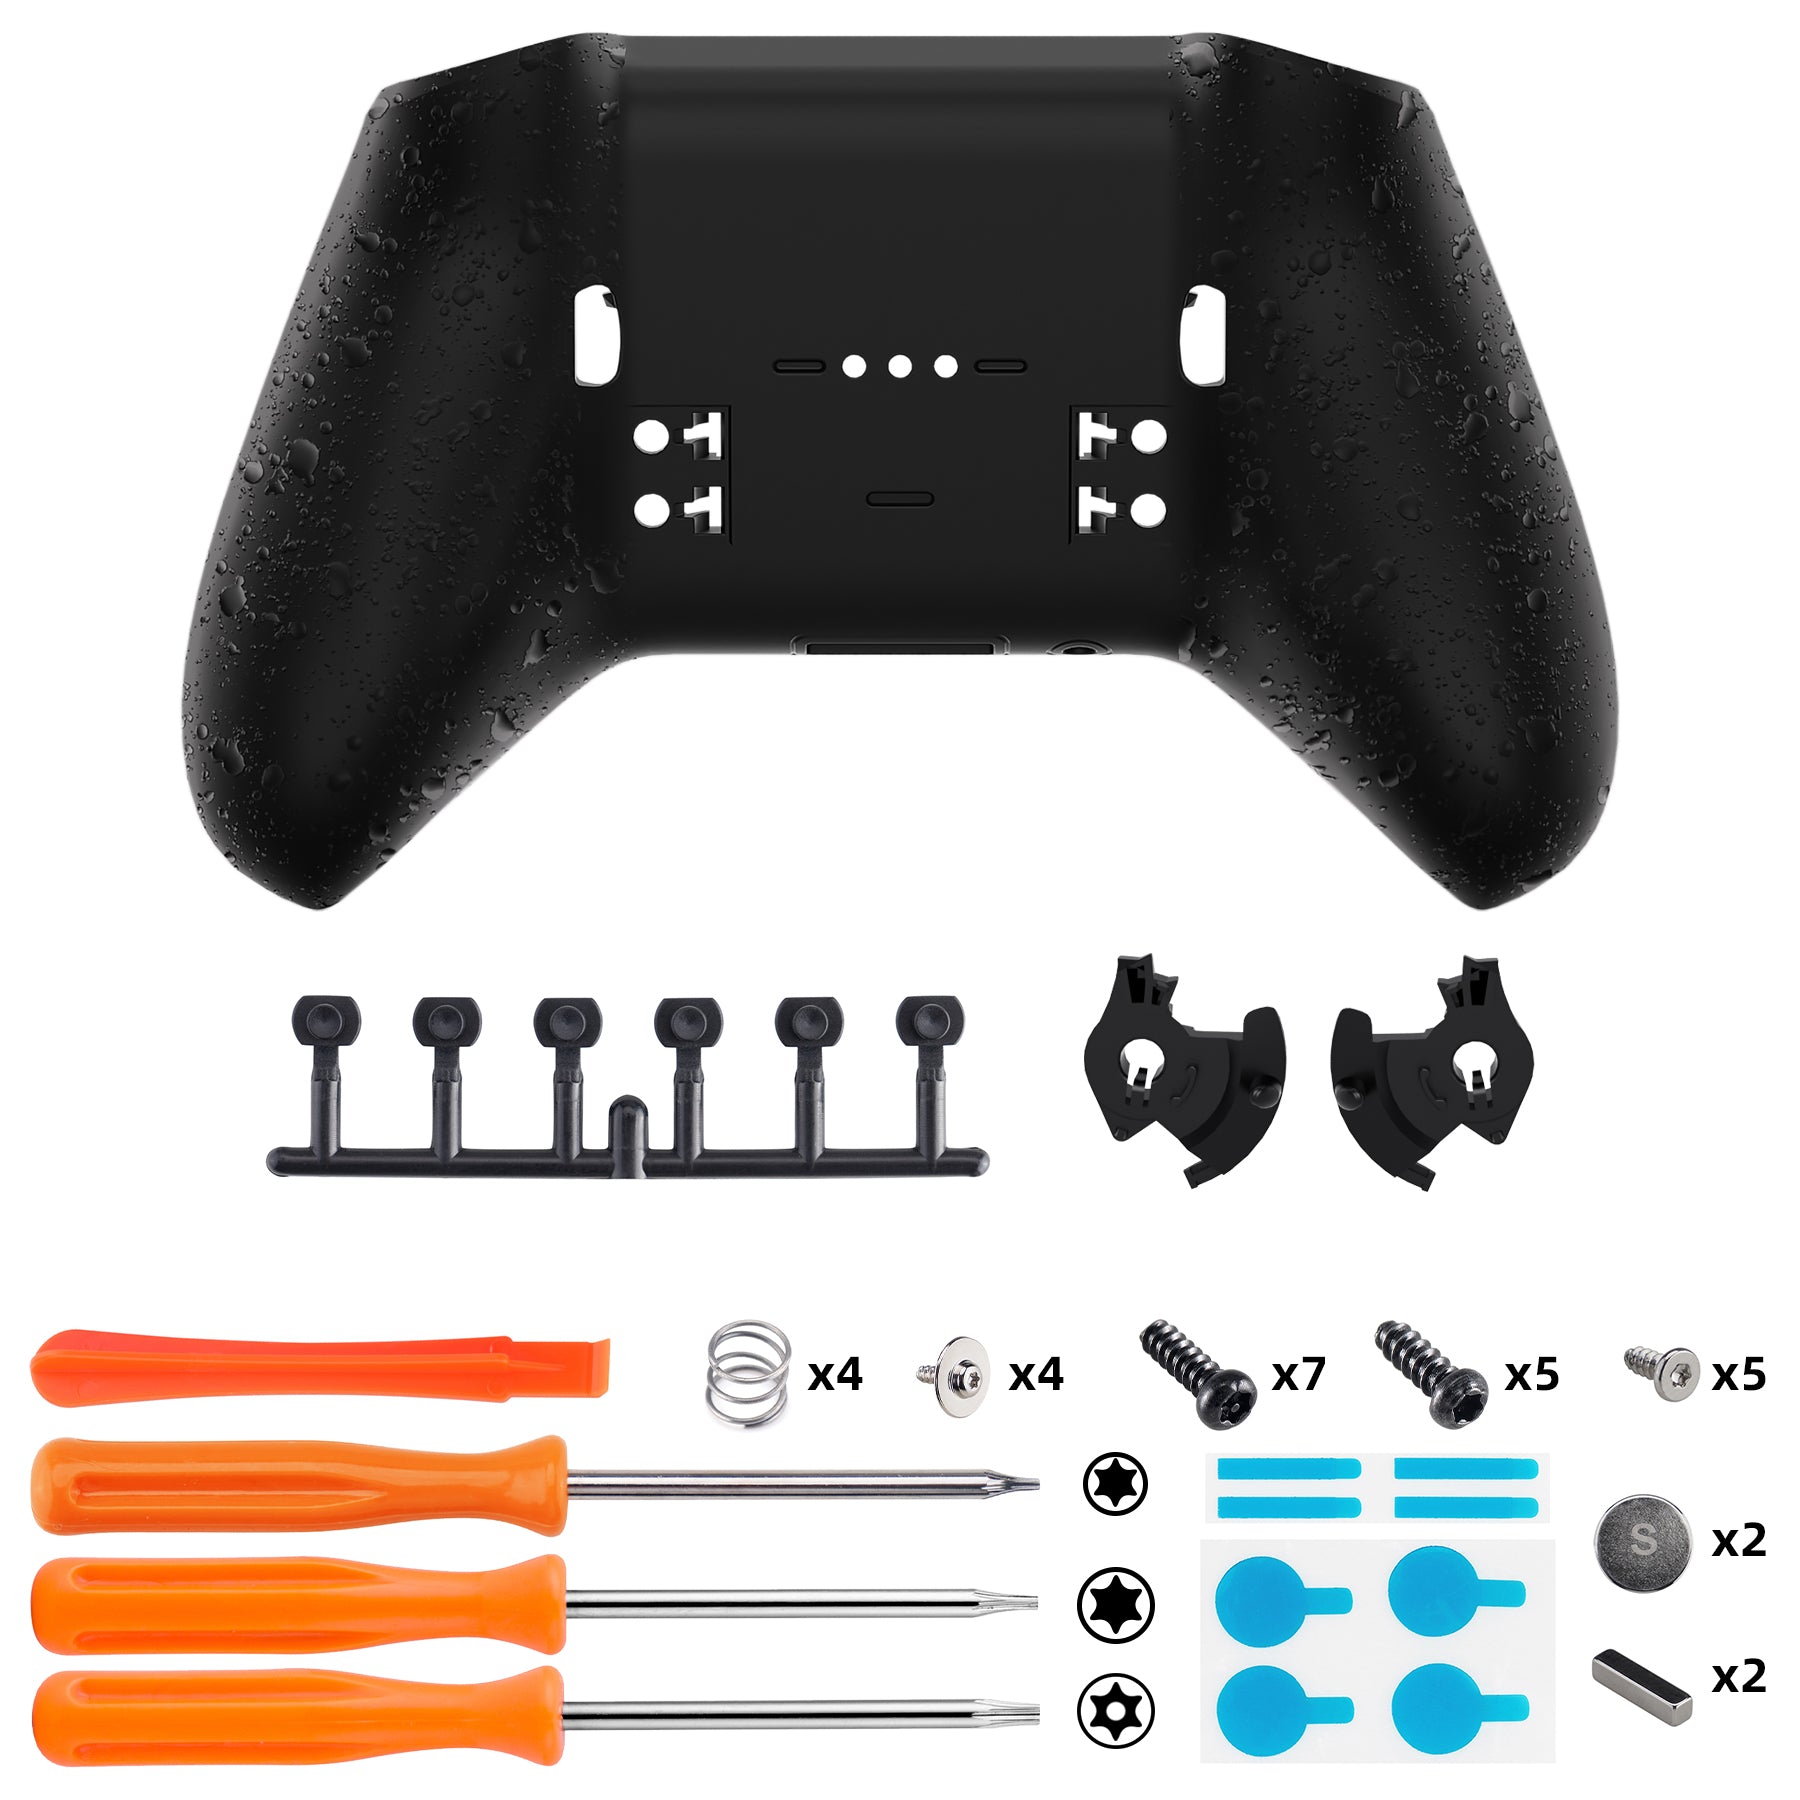 Replacement Bottom Shell Case for Xbox Elite Series 2 & Elite Series 2 Core Controller Model 1797 - Textured Black eXtremeRate